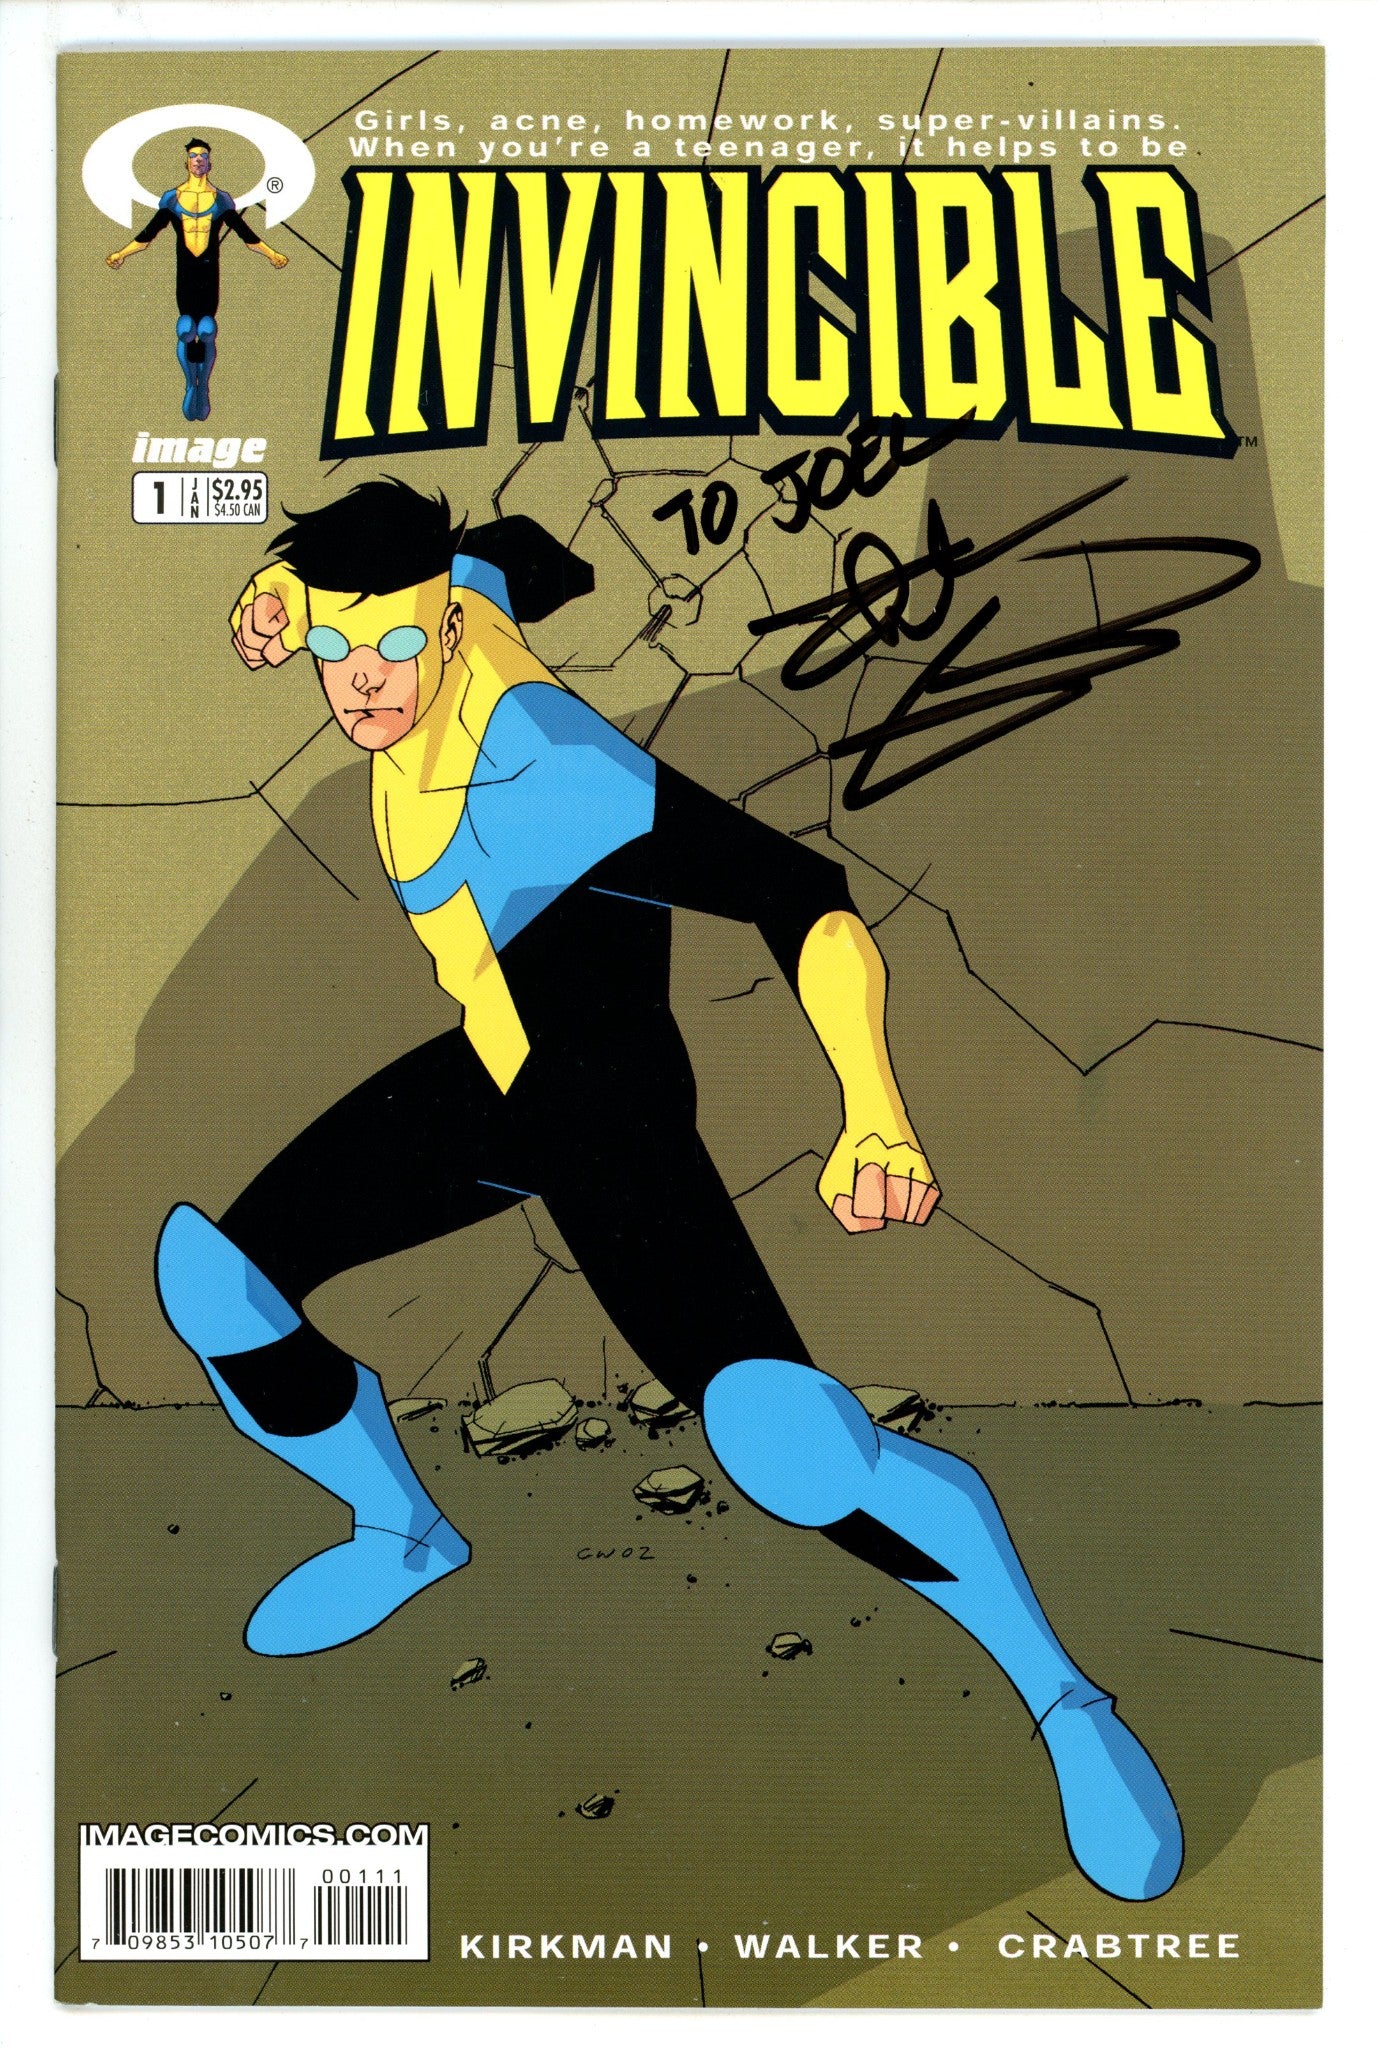 Invincible 1 VF/NM (9.0) (2003) Signed x1 Cover Robert Kirkman 